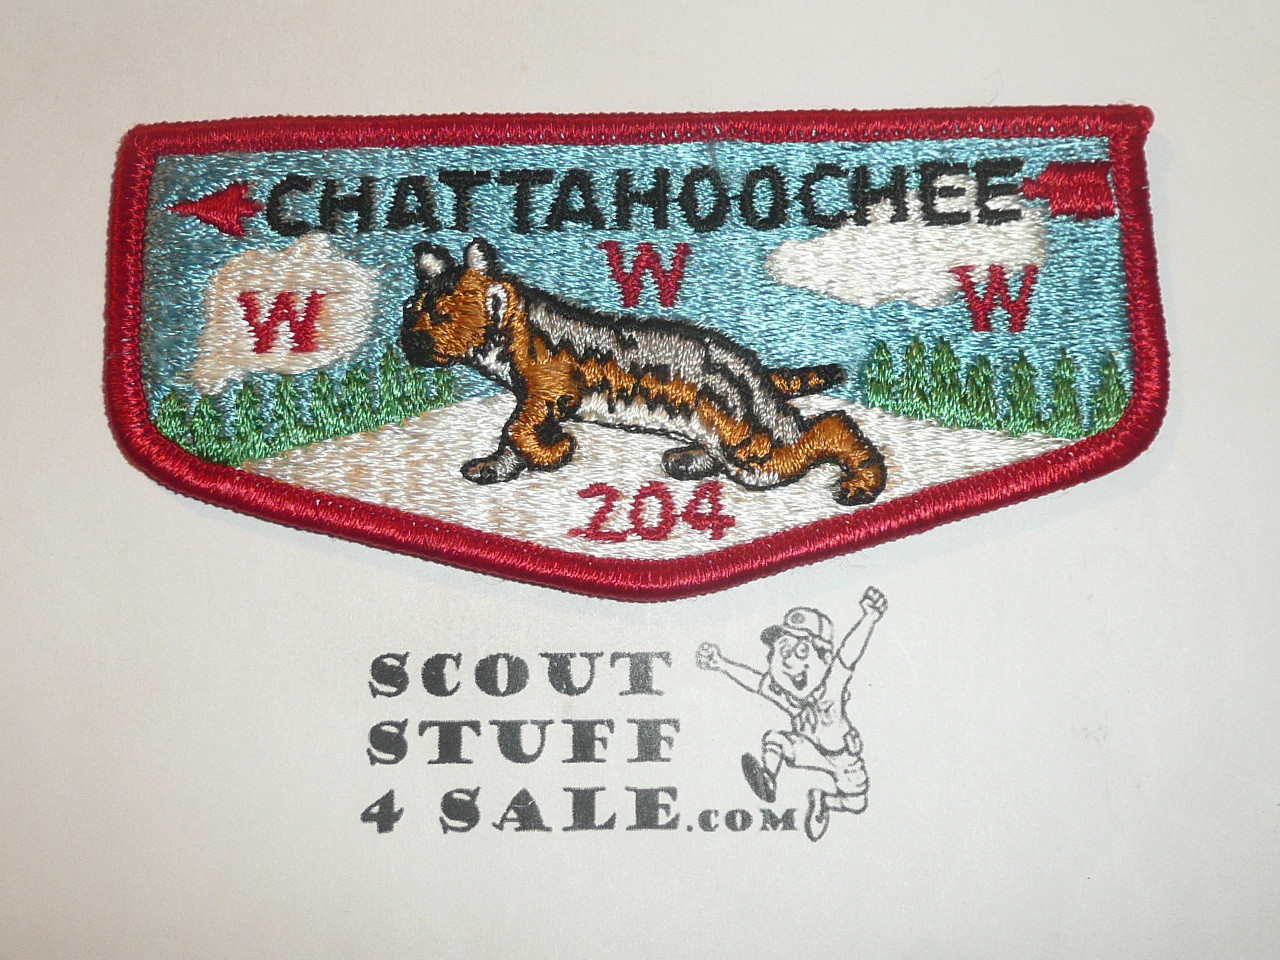 Order of the Arrow Lodge #204 Chattahoochee s5 Flap Patch